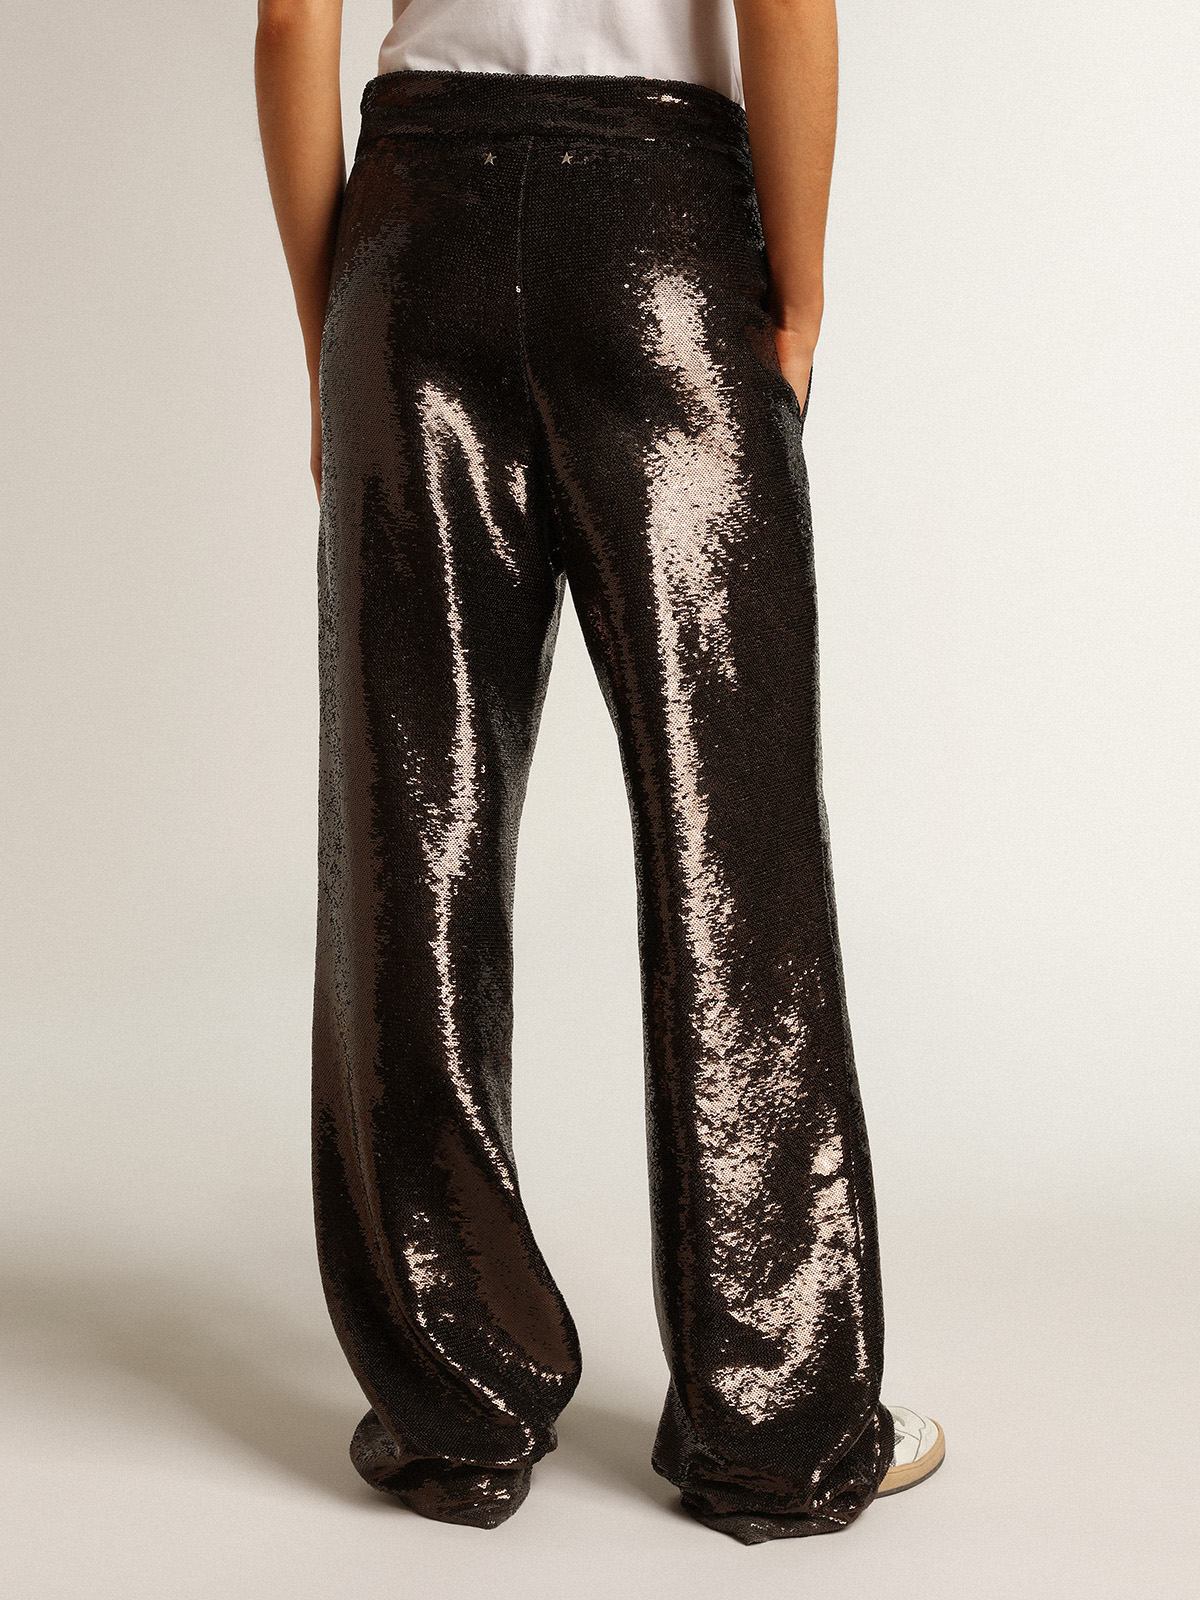 Proof that sequin pants are seriously versatile